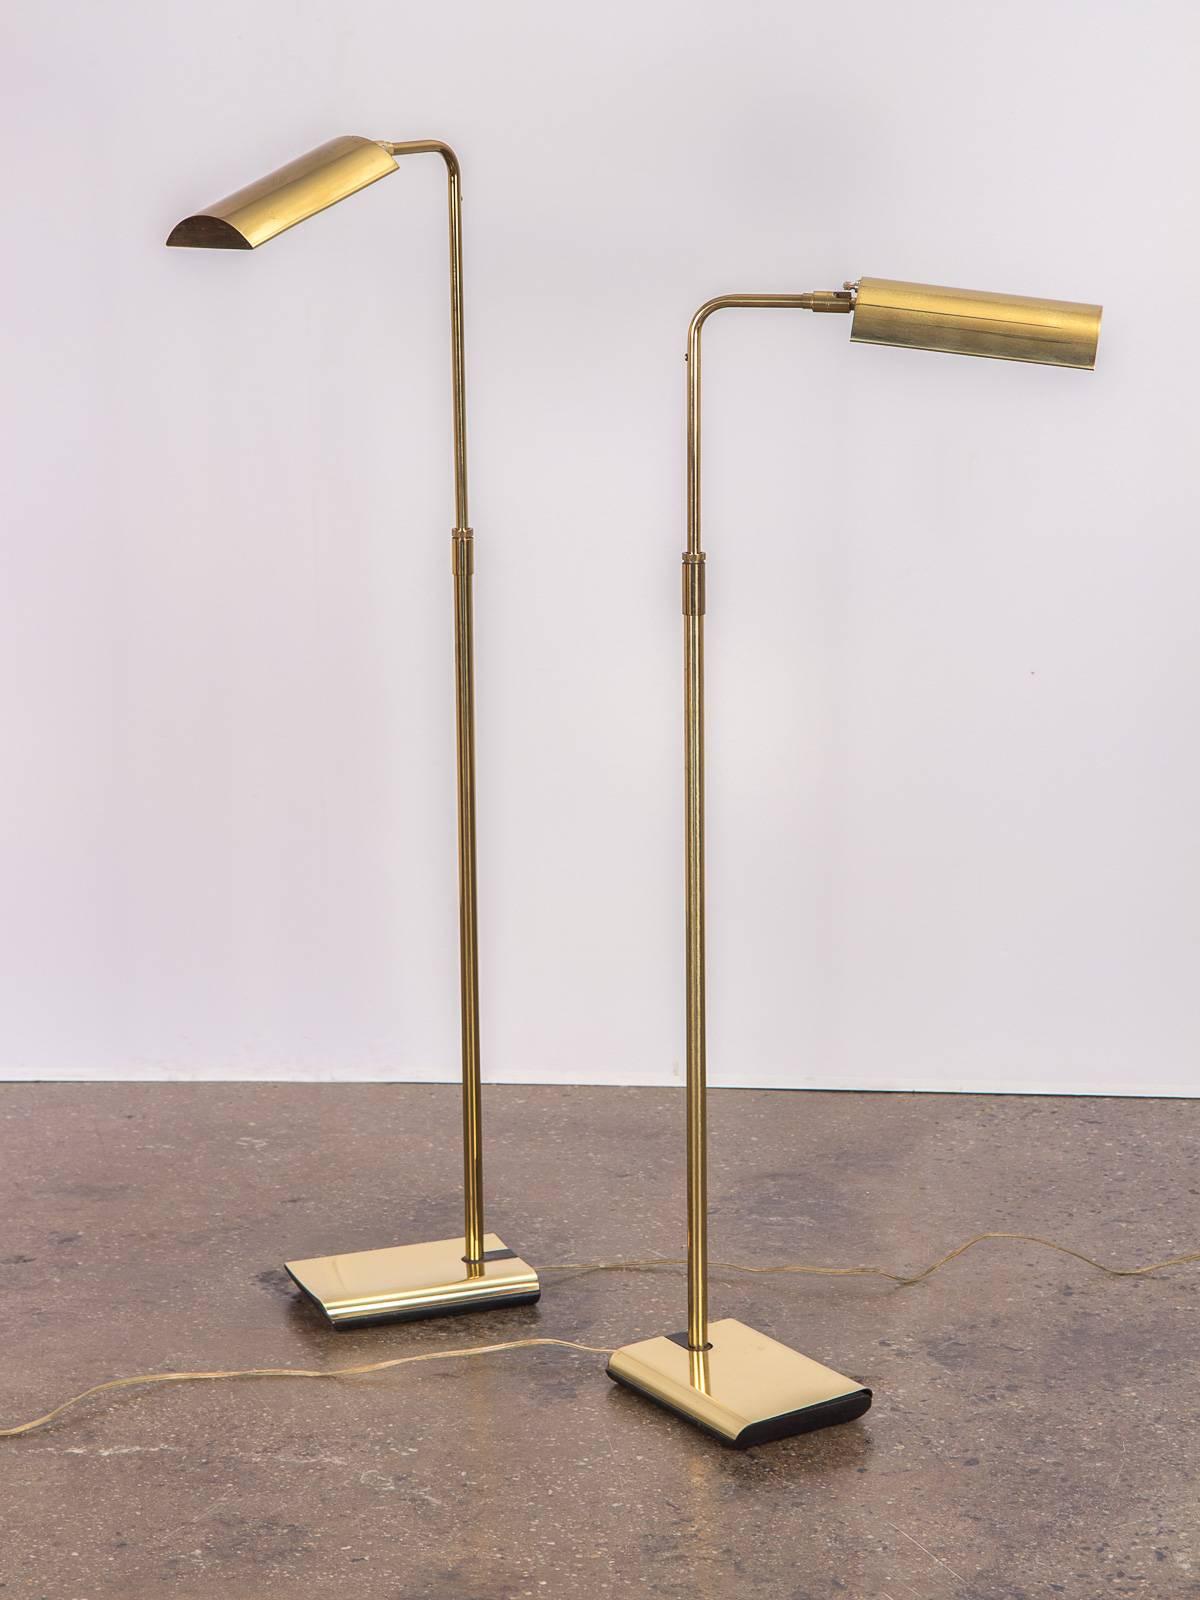 We have a pair of vintage brass floor lamps for Koch and Lowy. Fantastic reading lamp that is highly functional. Beautiful demilune shade articulates for direct lighting, and neck is adjustable for height. Tallest adjustment measures 46